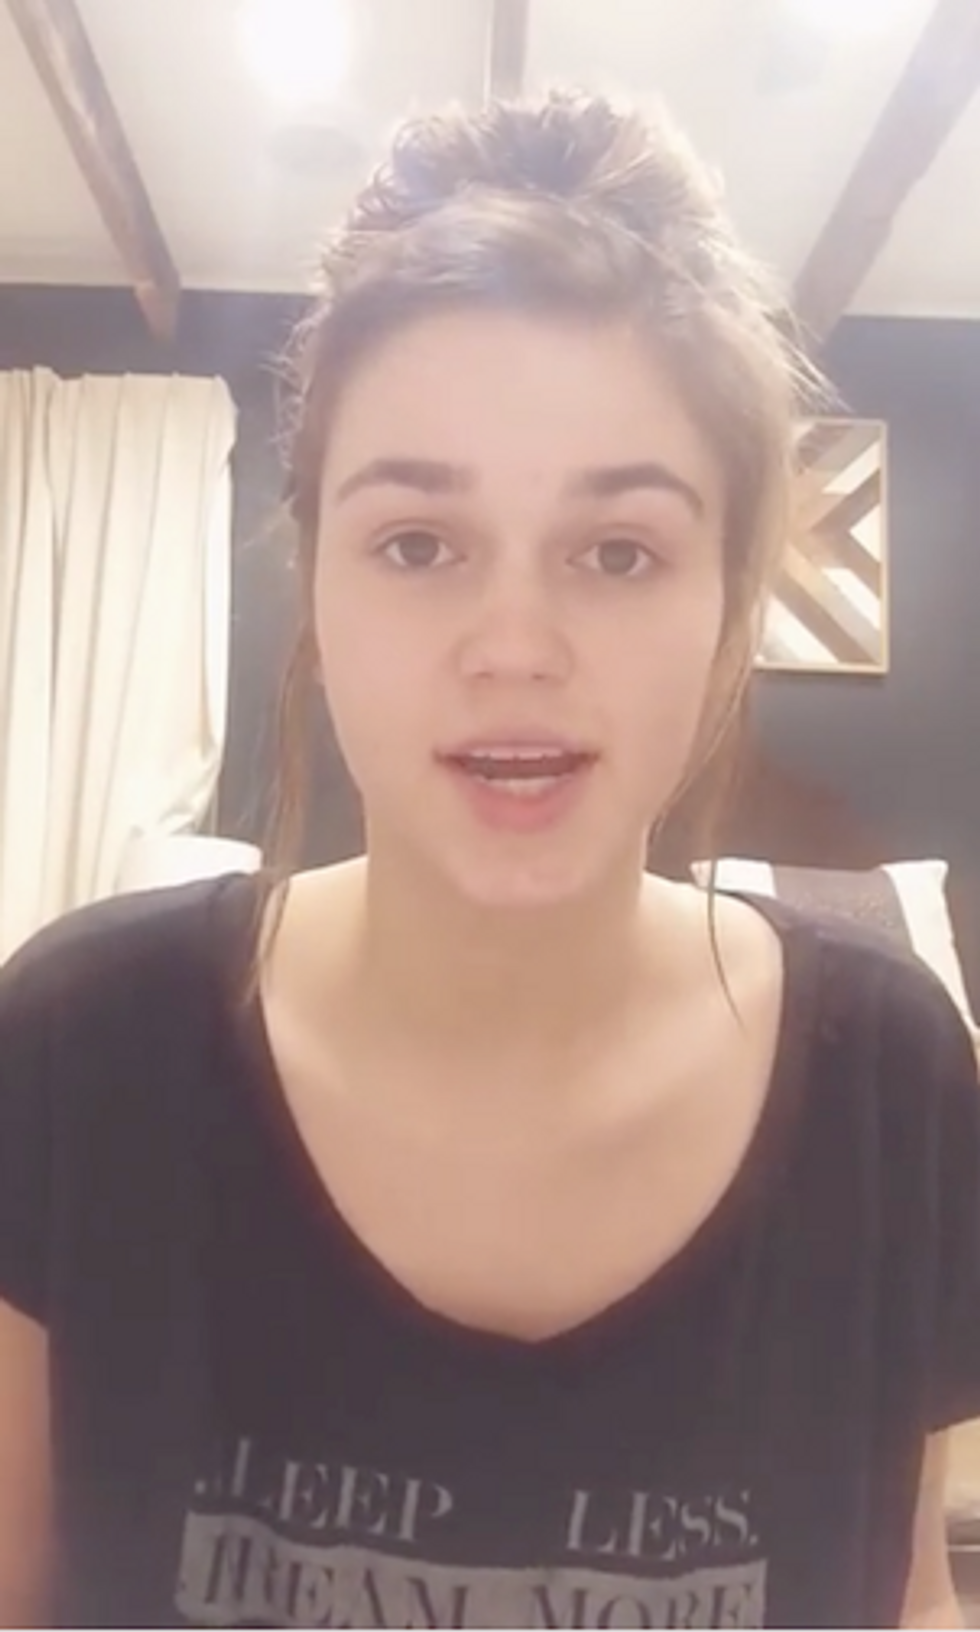 Duck Dynasty' Star Sadie Robertson Urges Cultural Change in Inspirational Late-Night Video Message: 'Seek the Good in Others